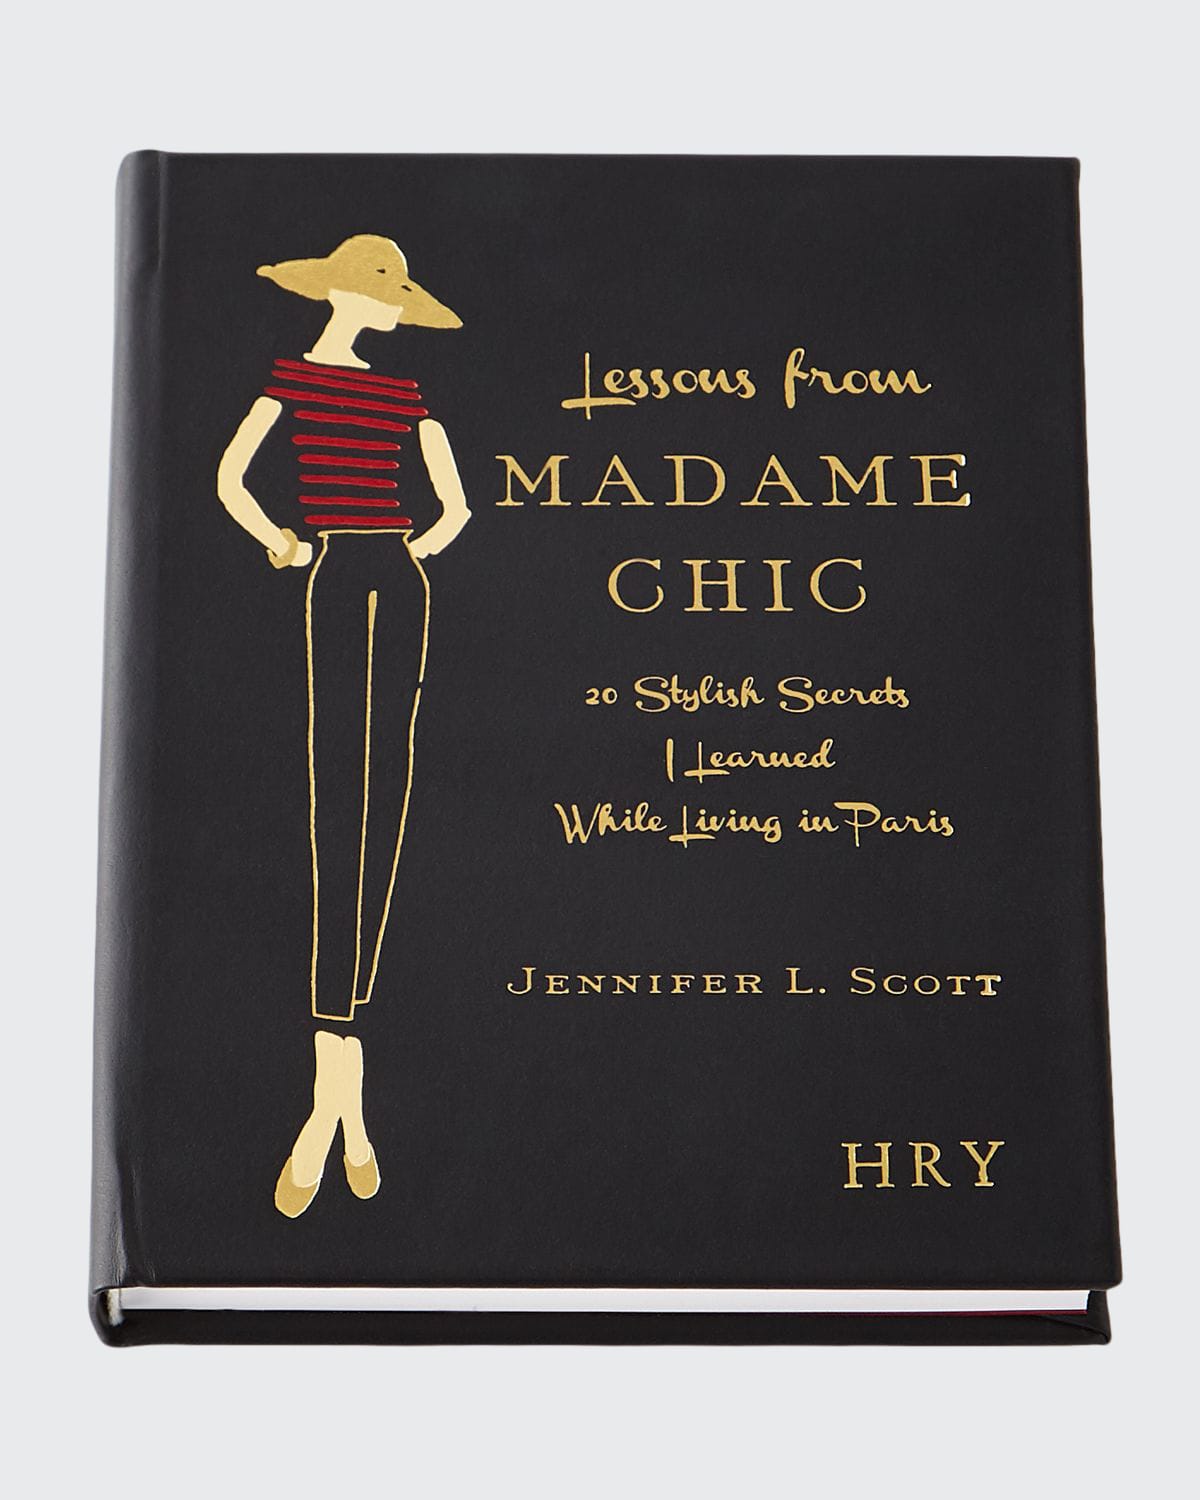 Shop Graphic Image Personalized "lessons From Madame Chic" Book By Jennifer L. Scott In Black